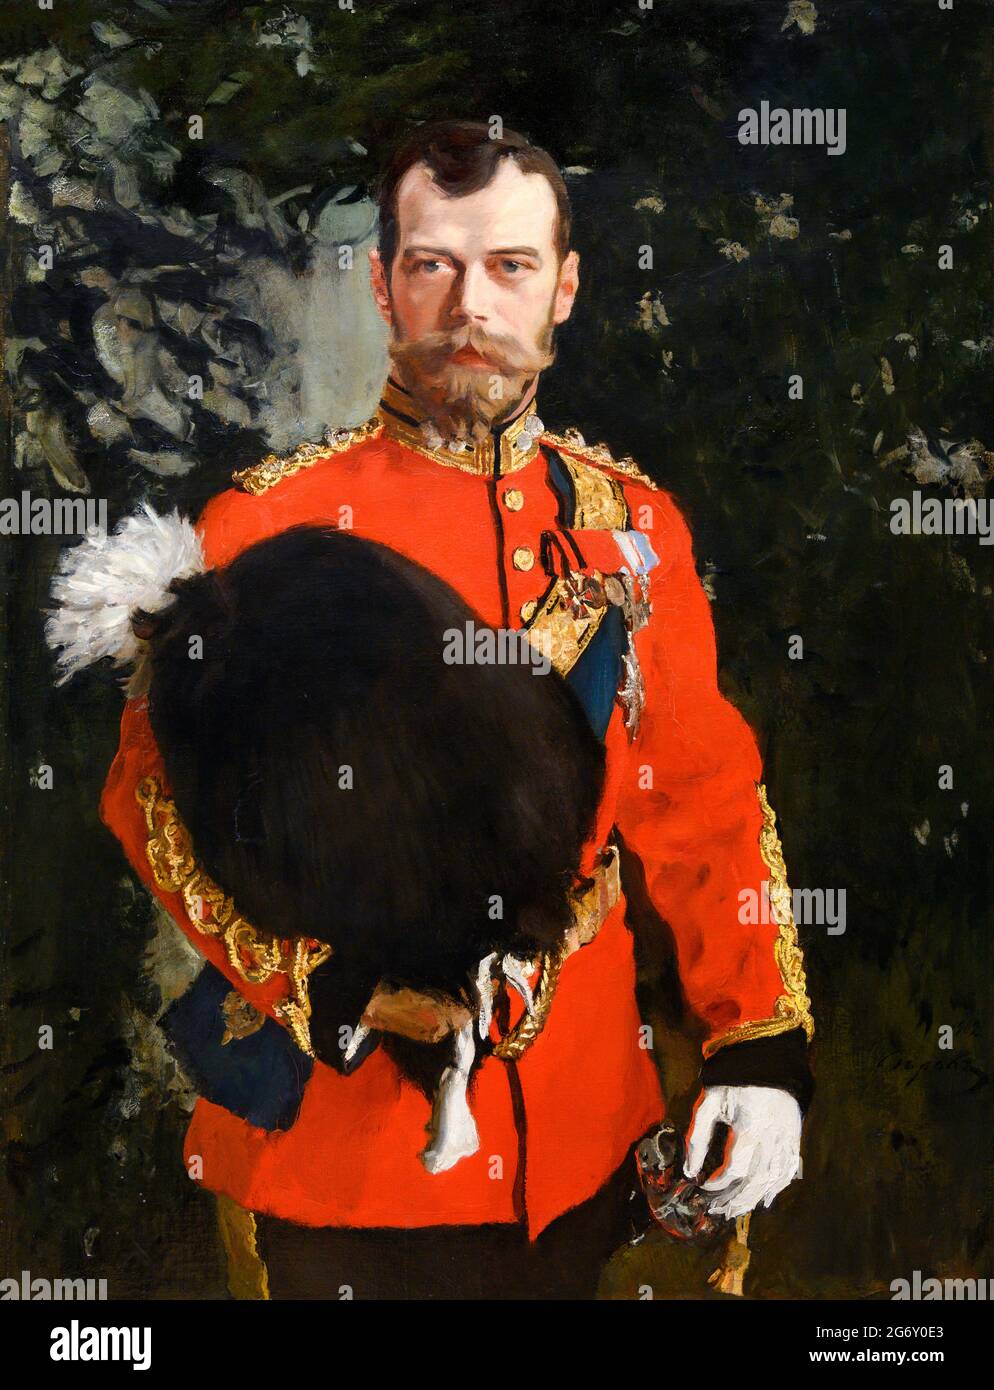 Tsar Nicholas II of Russia. Portrait of His Imperial Majesty Nicolai II Alexandrvitch, Tsar of All the Russias by Valentin Serov (1865-1911), oil on canvas, 1902 Stock Photo